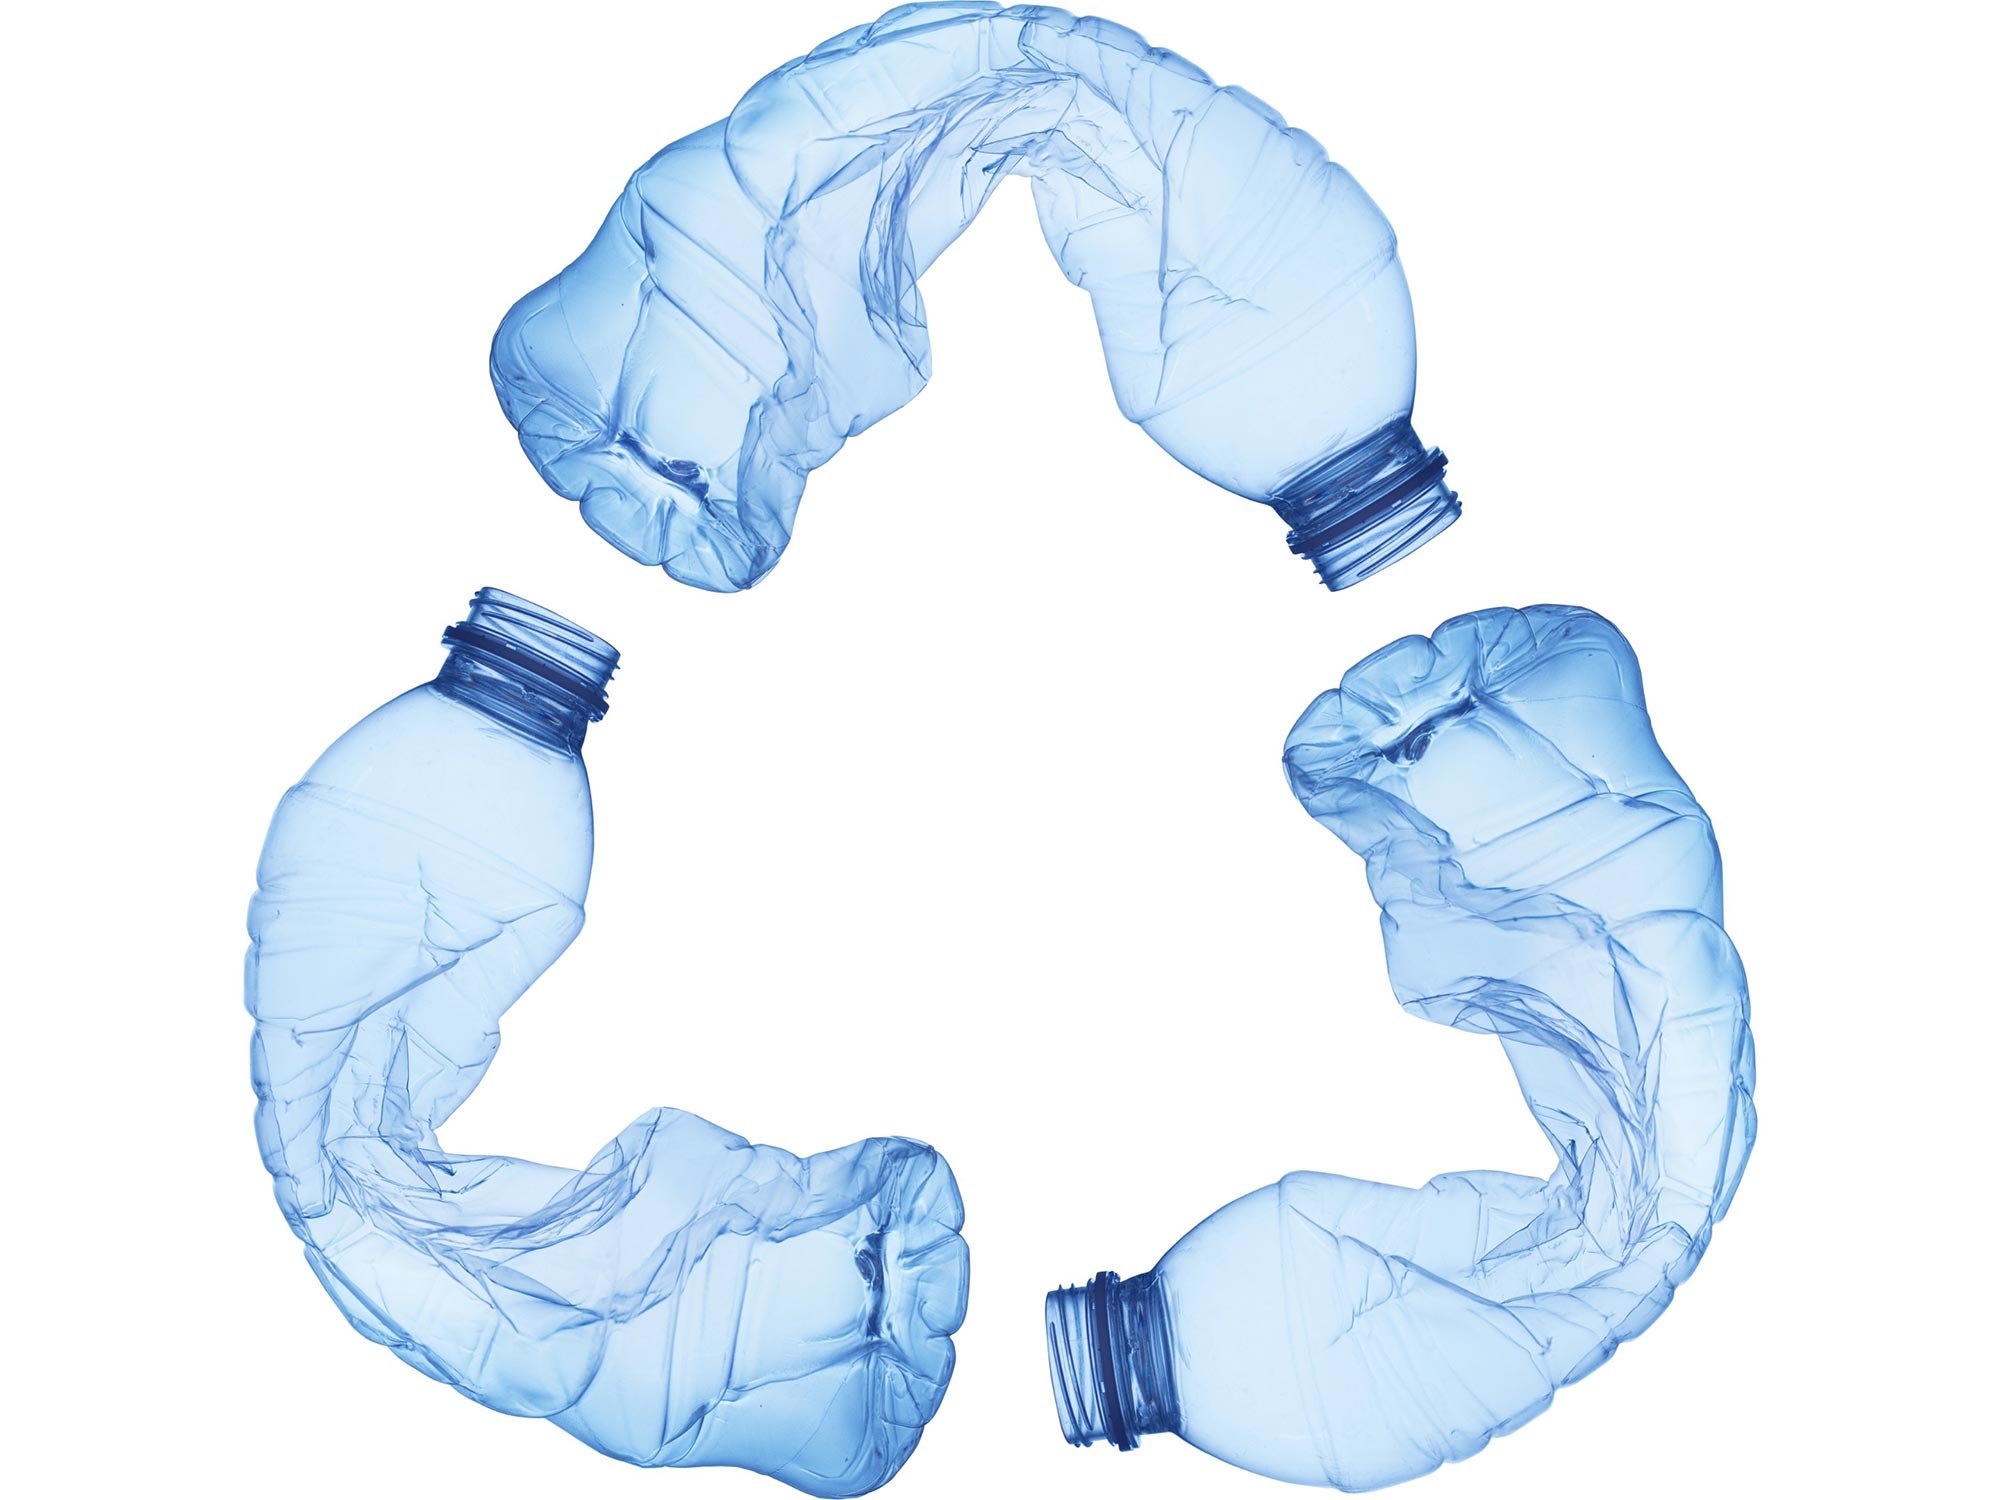 New Technology Is Key Step Toward Big Gains in Plastics Recycling